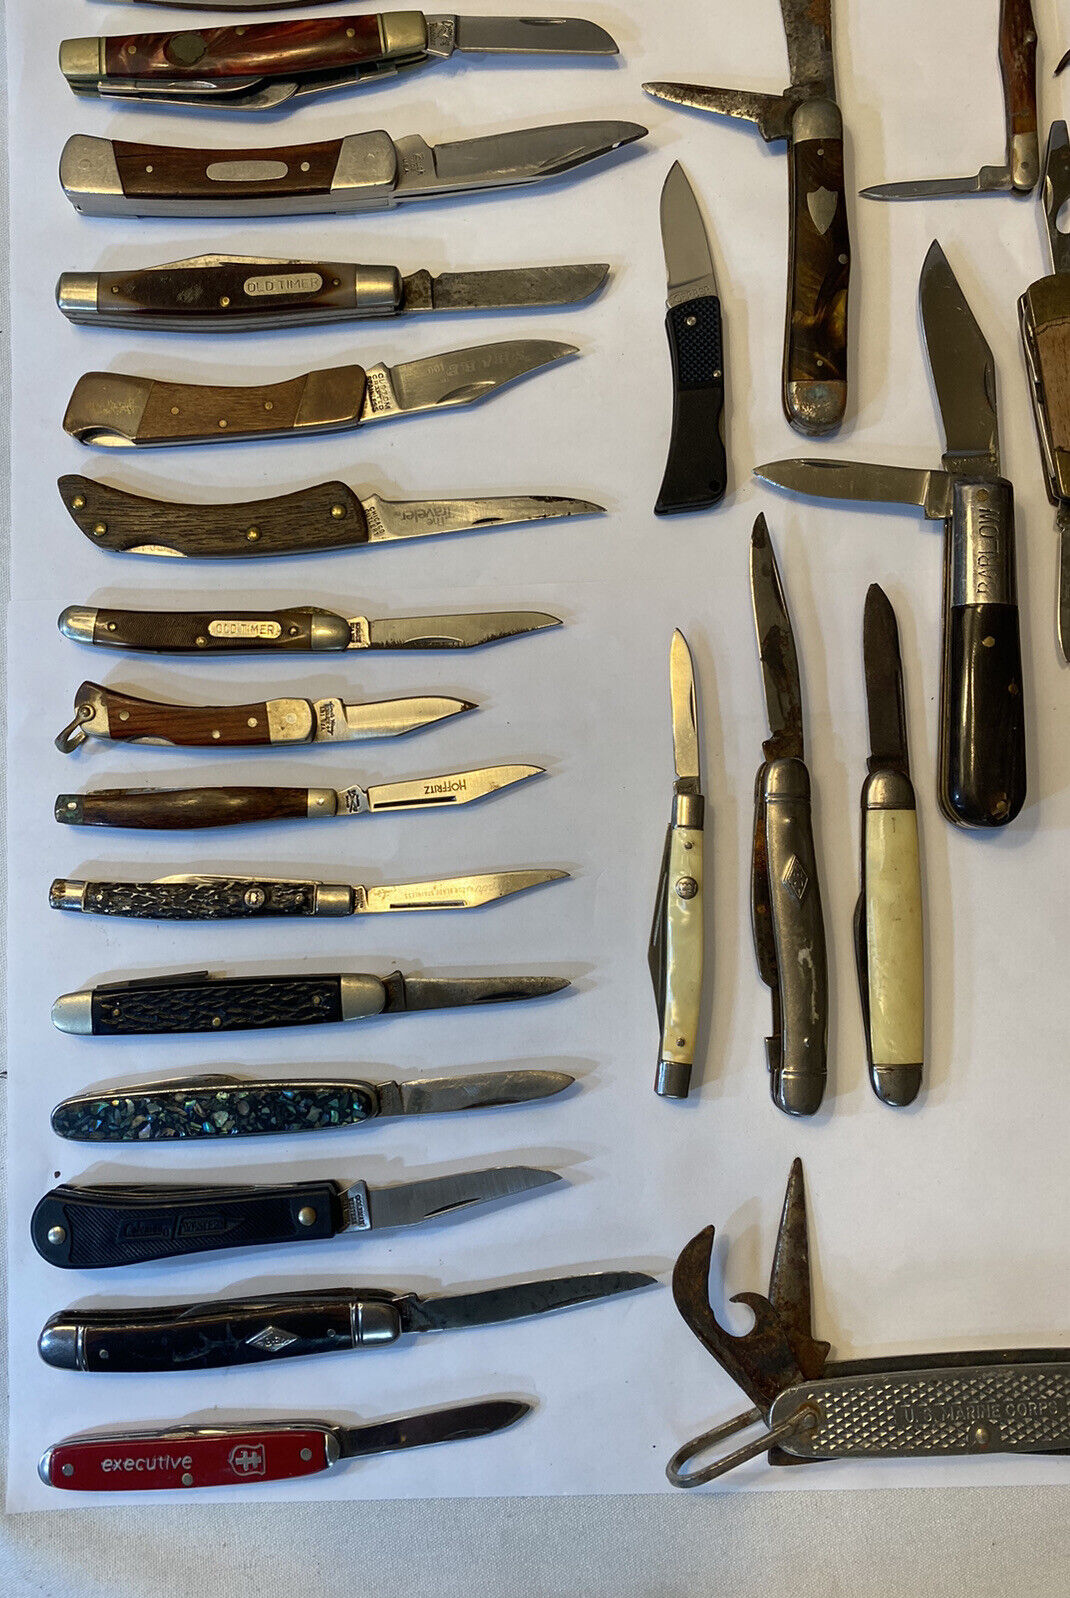 Large Lot 37 Pocket Knives -many Brands And Conditions Sold As Is. See Pictures